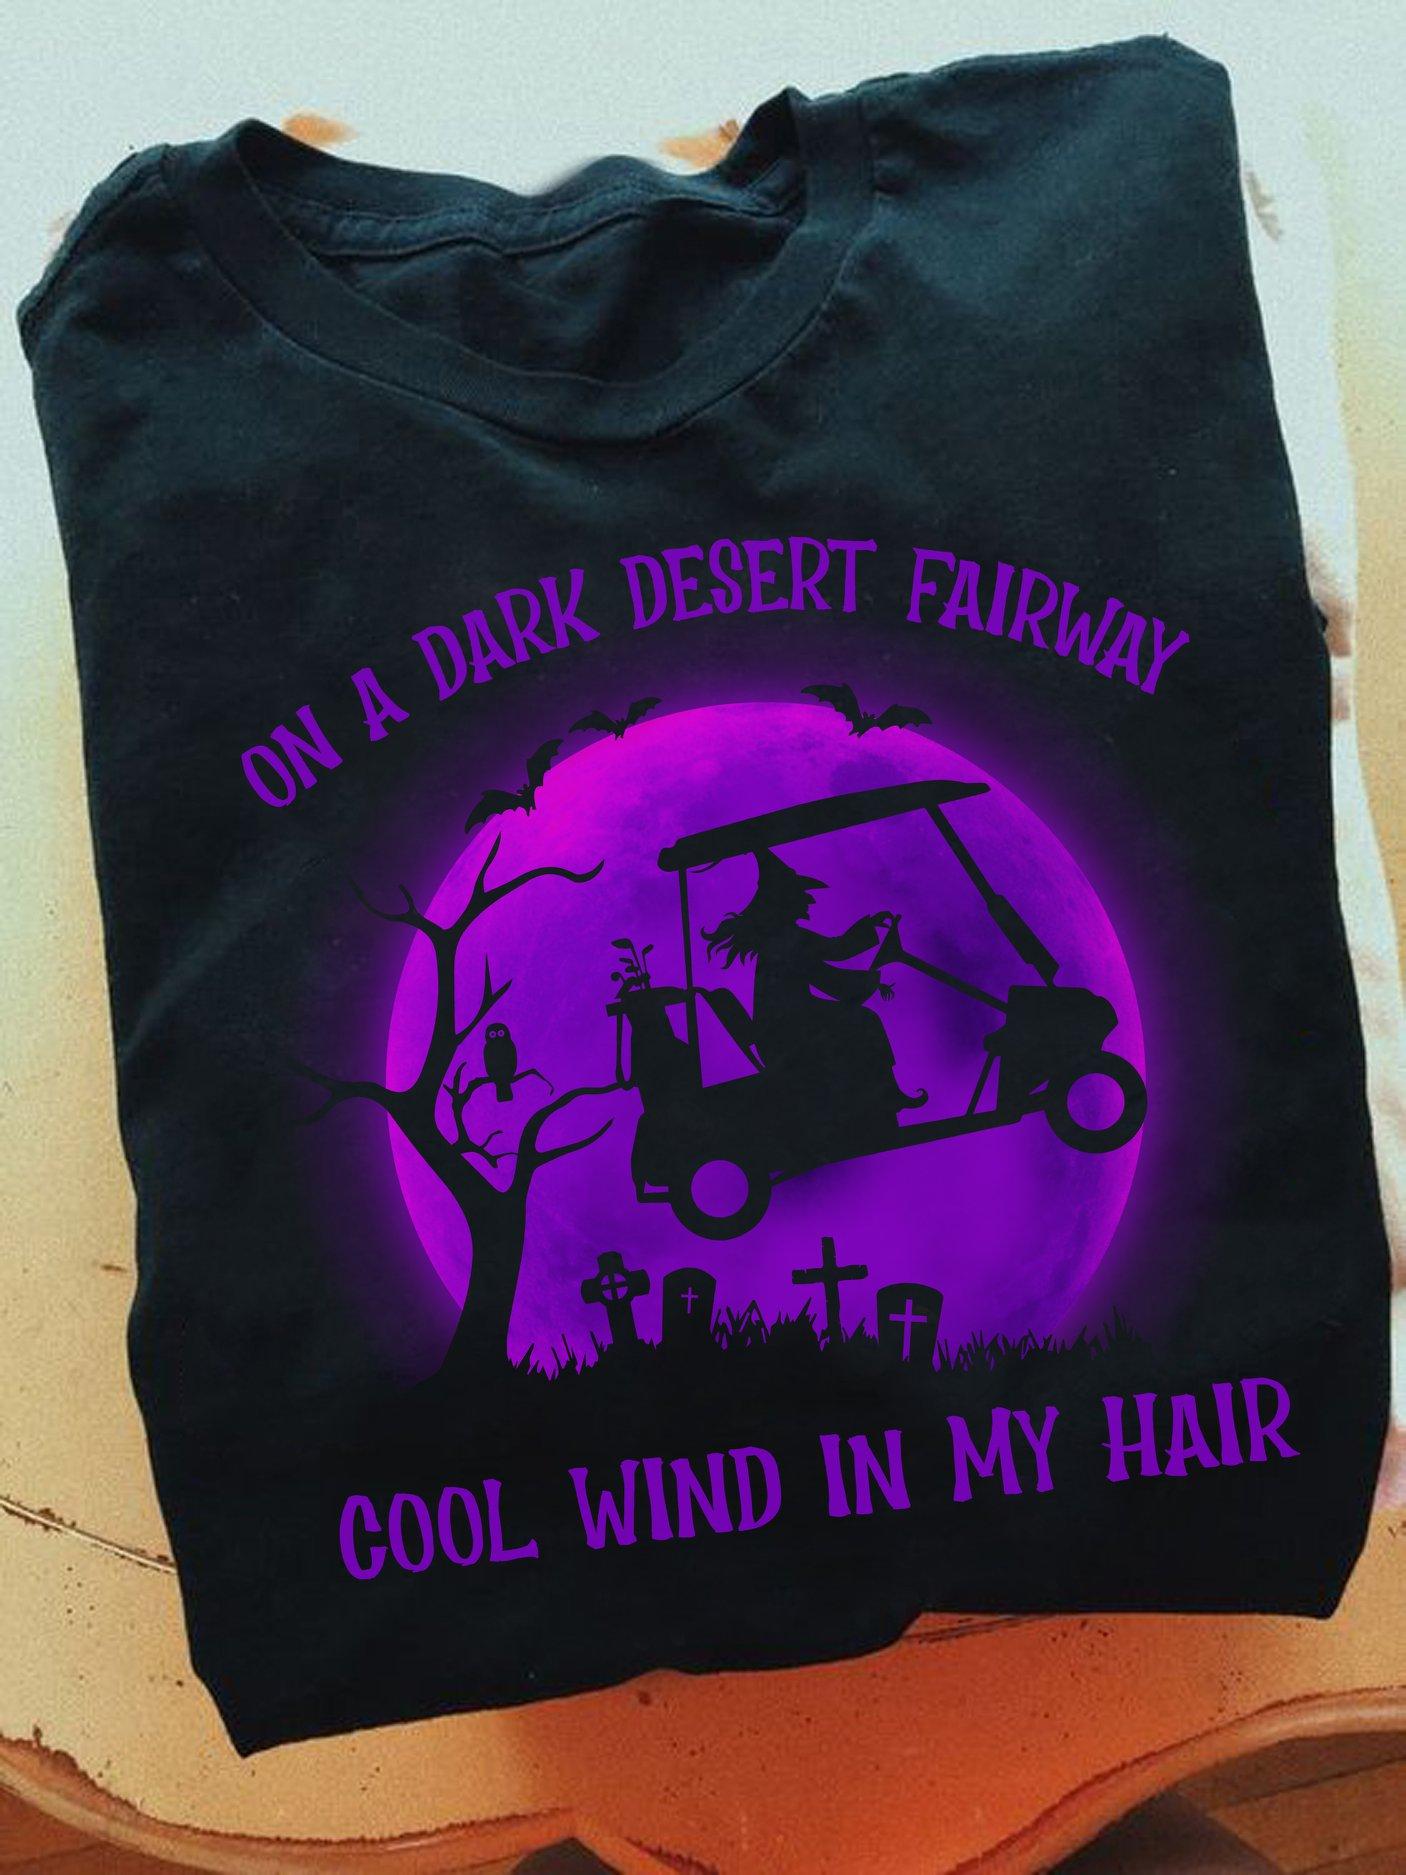 On a dark desert fairway, cool wind in my hair - Witch driving golf cart, Halloween gift for golfers